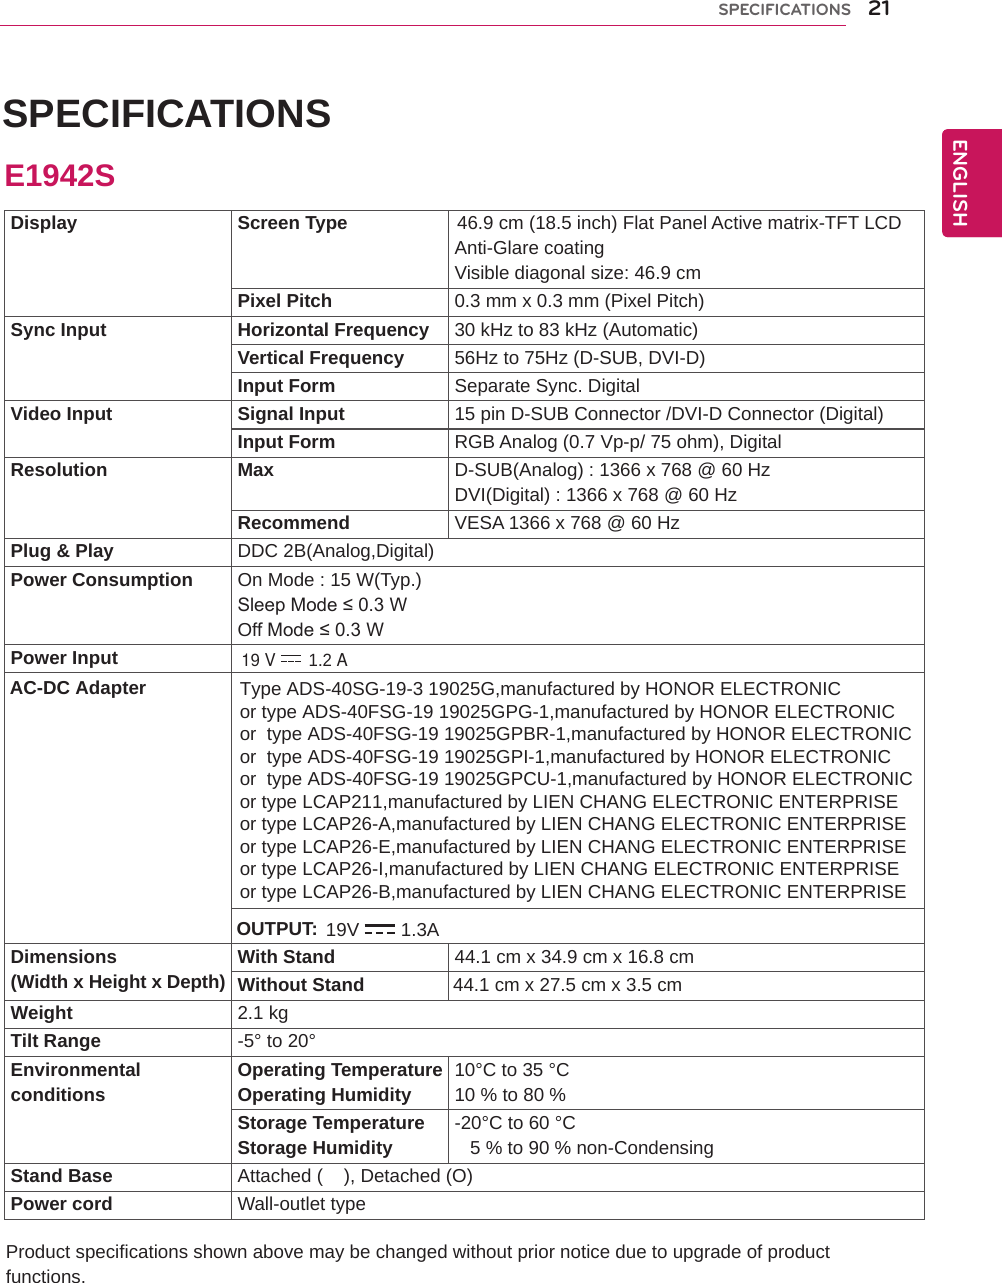 21ENGENGLISHSPECIFICATIONS SPECIFICATIONS Product specifications shown above may be changed without prior notice due to upgrade of product functions.Display Screen Type                     46.9 cm (18.5 inch) Flat Panel Active matrix-TFT LCDAnti-Glare coatingVisible diagonal size: 46.9 cmPixel Pitch 0.3 mm x 0.3 mm (Pixel Pitch)Sync Input Horizontal Frequency 30 kHz to 83 kHz (Automatic)Vertical Frequency 56Hz to 75Hz (D-SUB, DVI-D)Input Form Separate Sync. DigitalVideo Input Signal Input 15 pin D-SUB Connector /DVI-D Connector (Digital)Input Form RGB Analog (0.7 Vp-p/ 75 ohm), DigitalResolution Max D-SUB(Analog) : 1366 x 768 @ 60 HzDVI(Digital) : 1366 x 768 @ 60 HzRecommend VESA 1366 x 768 @ 60 HzPlug &amp; Play DDC 2B(Analog,Digital)Power Consumption On Mode : 15 W(Typ.)Sleep Mode ≤ 0.3 W Off Mode ≤ 0.3 W Power InputDimensions(Width x Height x Depth) With Stand 44.1 cm x 34.9 cm x 16.8 cmWithout Stand                 44.1 cm x 27.5 cm x 3.5 cmWeight 2.1 kgTilt Range -5° to 20°Environmentalconditions Operating TemperatureOperating Humidity 10°C to 35 °C10 % to 80 % Storage TemperatureStorage Humidity -20°C to 60 °C   5 % to 90 % non-CondensingStand Base Attached (    ), Detached (O)Power cord Wall-outlet typeE1942S19 V 1.2 A AC-DC Adapter Type ADS-40SG-19-3 19025G,manufactured by HONOR ELECTRONICor type ADS-40FSG-19 19025GPG-1,manufactured by HONOR ELECTRONICor  type ADS-40FSG-19 19025GPBR-1,manufactured by HONOR ELECTRONICor  type ADS-40FSG-19 19025GPI-1,manufactured by HONOR ELECTRONICor  type ADS-40FSG-19 19025GPCU-1,manufactured by HONOR ELECTRONICor type LCAP211,manufactured by LIEN CHANG ELECTRONIC ENTERPRISEor type LCAP26-A,manufactured by LIEN CHANG ELECTRONIC ENTERPRISEor type LCAP26-E,manufactured by LIEN CHANG ELECTRONIC ENTERPRISEor type LCAP26-I,manufactured by LIEN CHANG ELECTRONIC ENTERPRISEor type LCAP26-B,manufactured by LIEN CHANG ELECTRONIC ENTERPRISE OUTPUT: 19V 1.3A